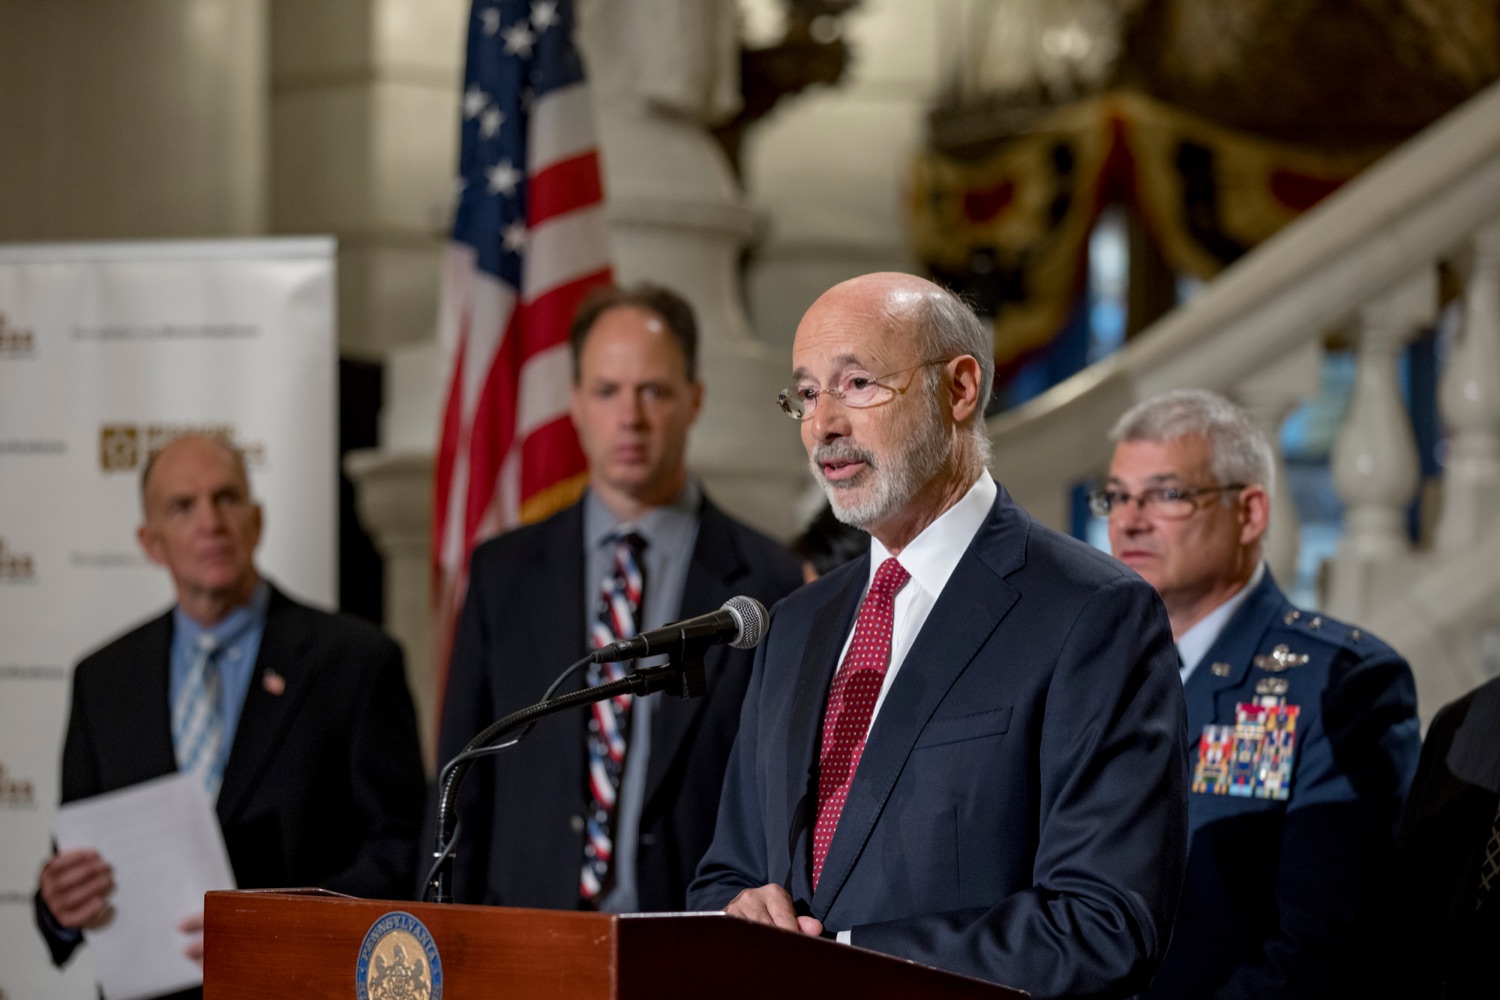 Pennsylvania Governor Tom Wolf speaks during a press conference outlining how competition for qualified individuals among all employment sectors affects military recruiting efforts and warrants greater investment in our next generation inside the Capitol Rotunda on Tuesday, November 12, 2019.<br><a href="https://filesource.amperwave.net/commonwealthofpa/photo/17588_GOV_Mission_Readiness_NK_003.JPG" target="_blank">⇣ Download Photo</a>